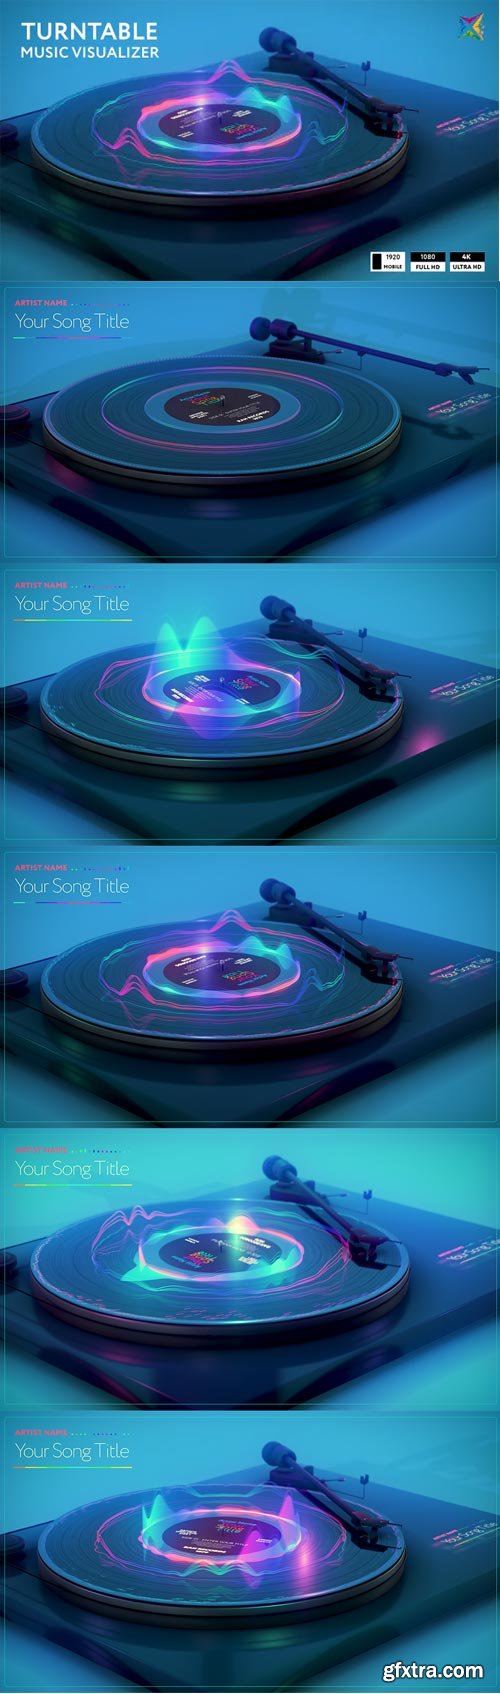 Videohive - Turntable Music Visualizer - 28772033